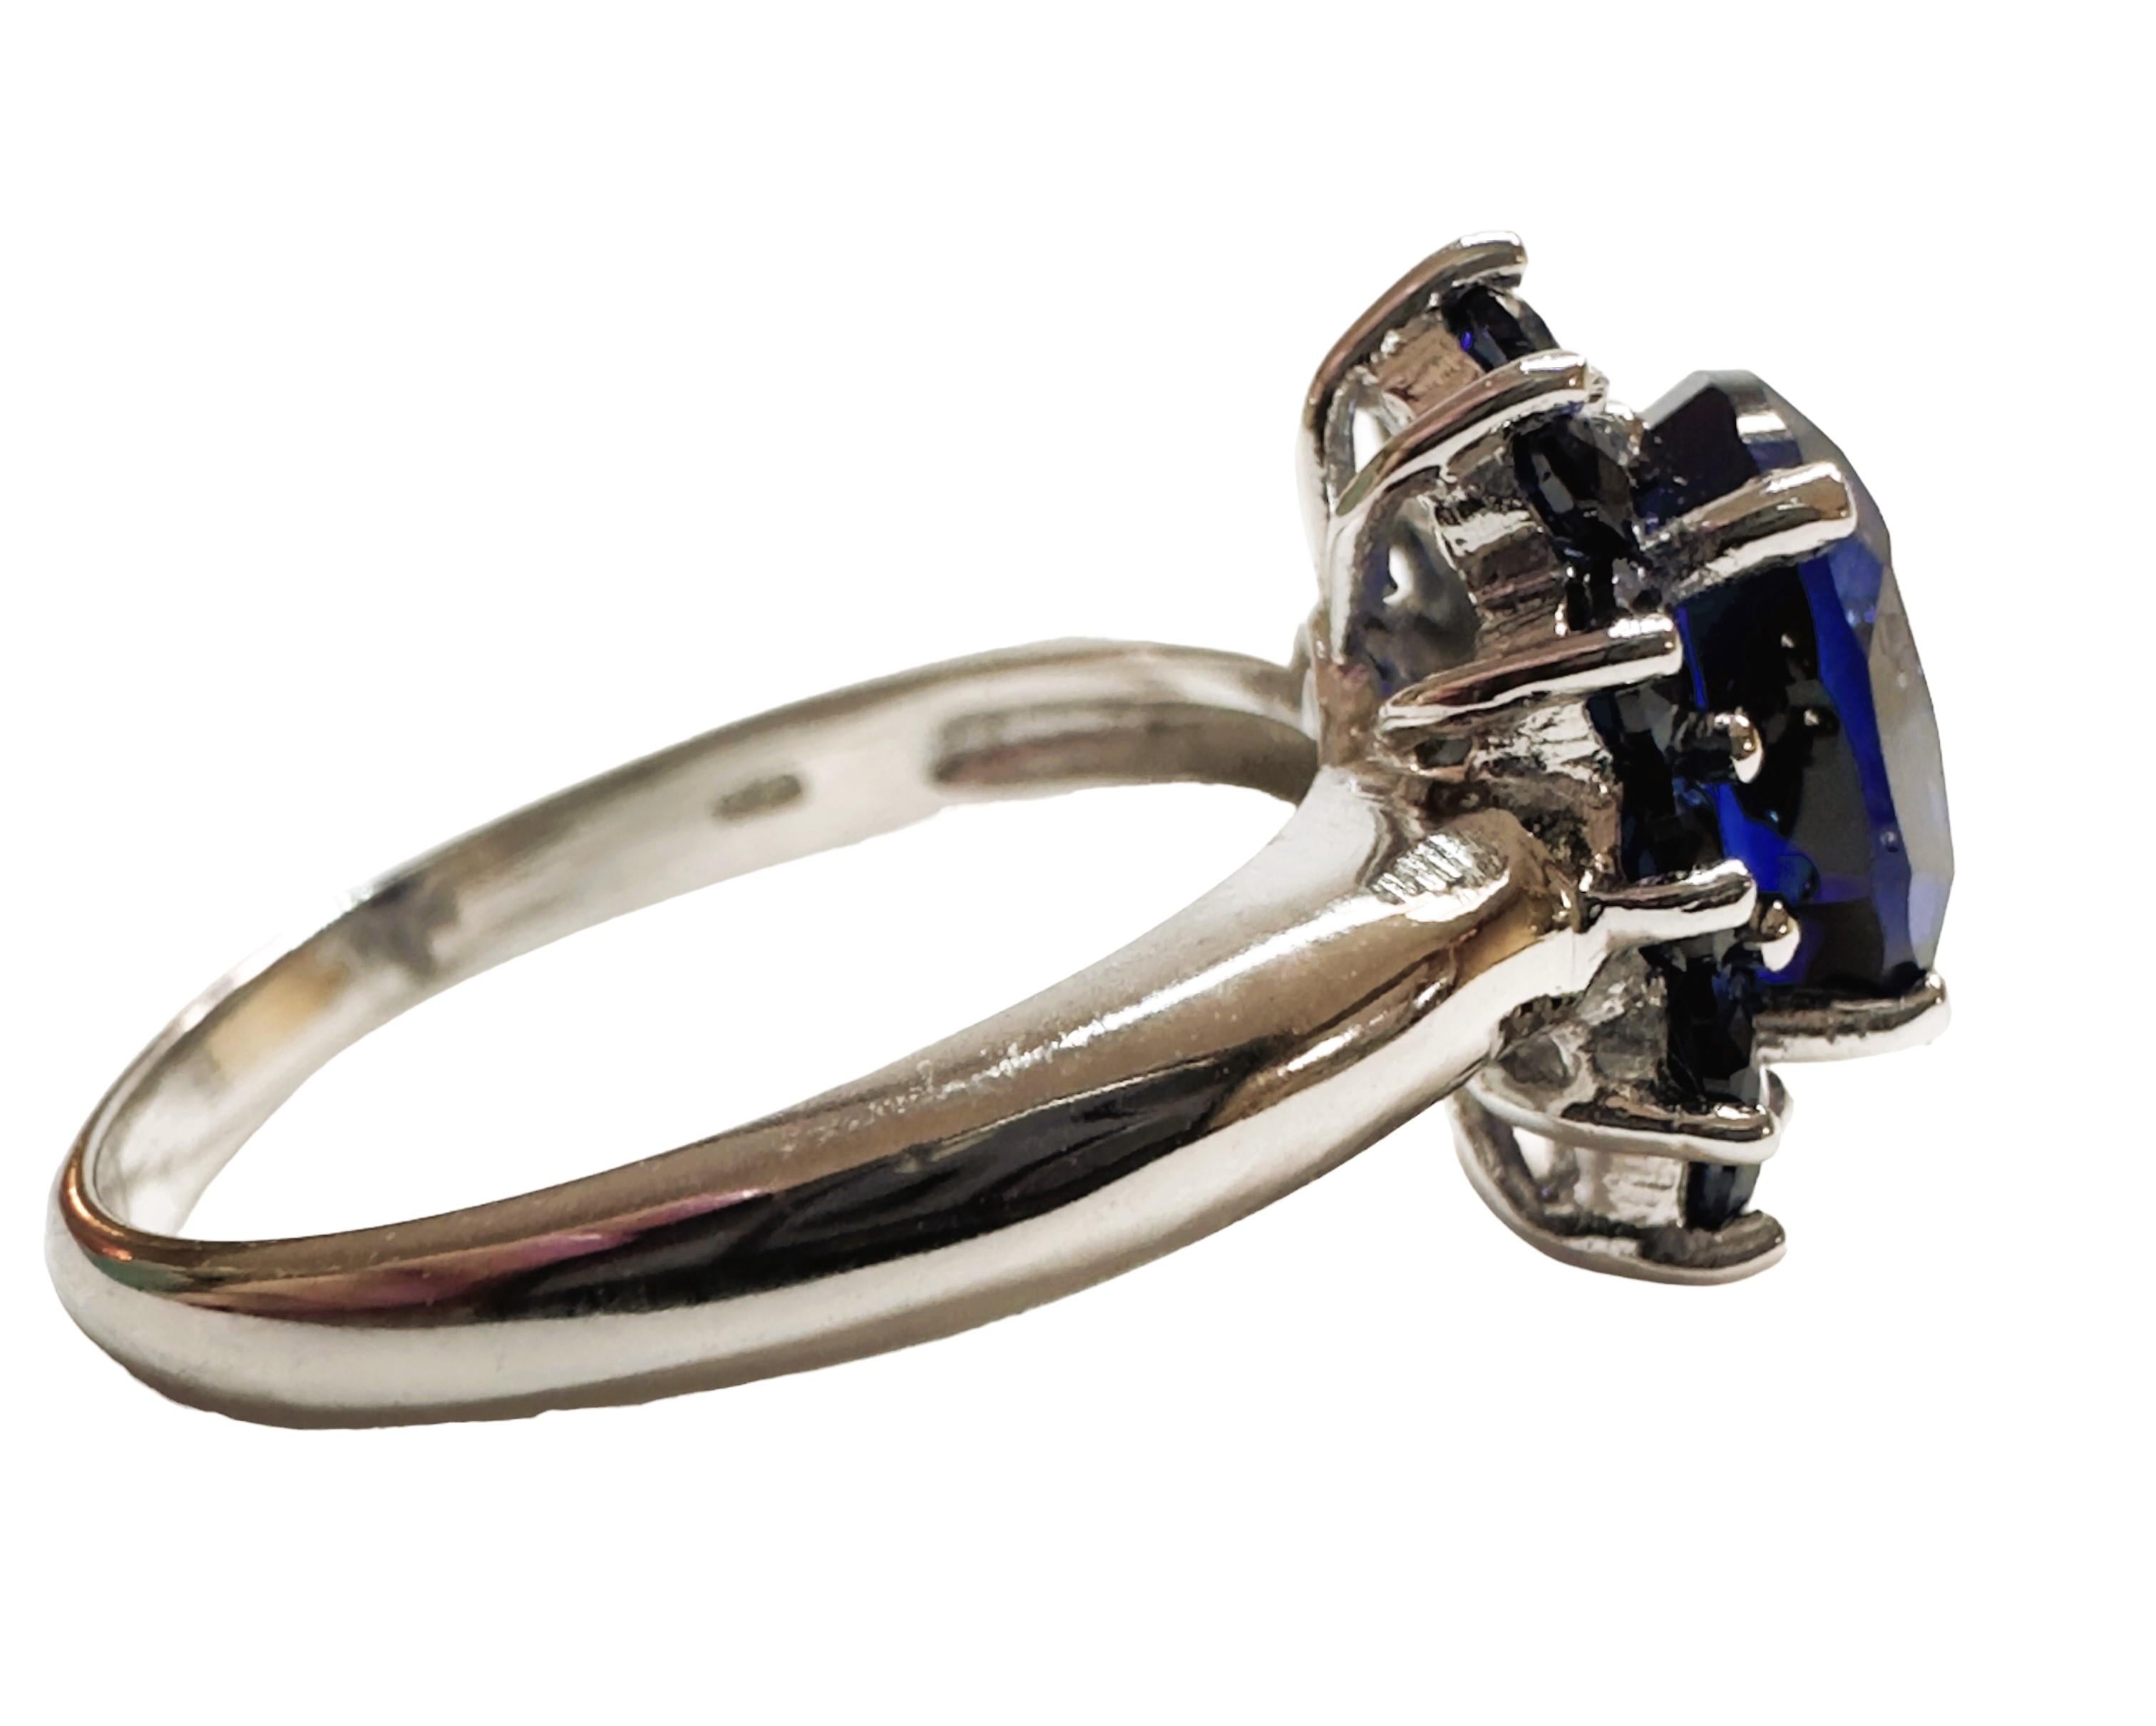 New African 3.20 Ct Deep Blue Sapphire Sterling Ring Size 6.25 In New Condition For Sale In Eagan, MN